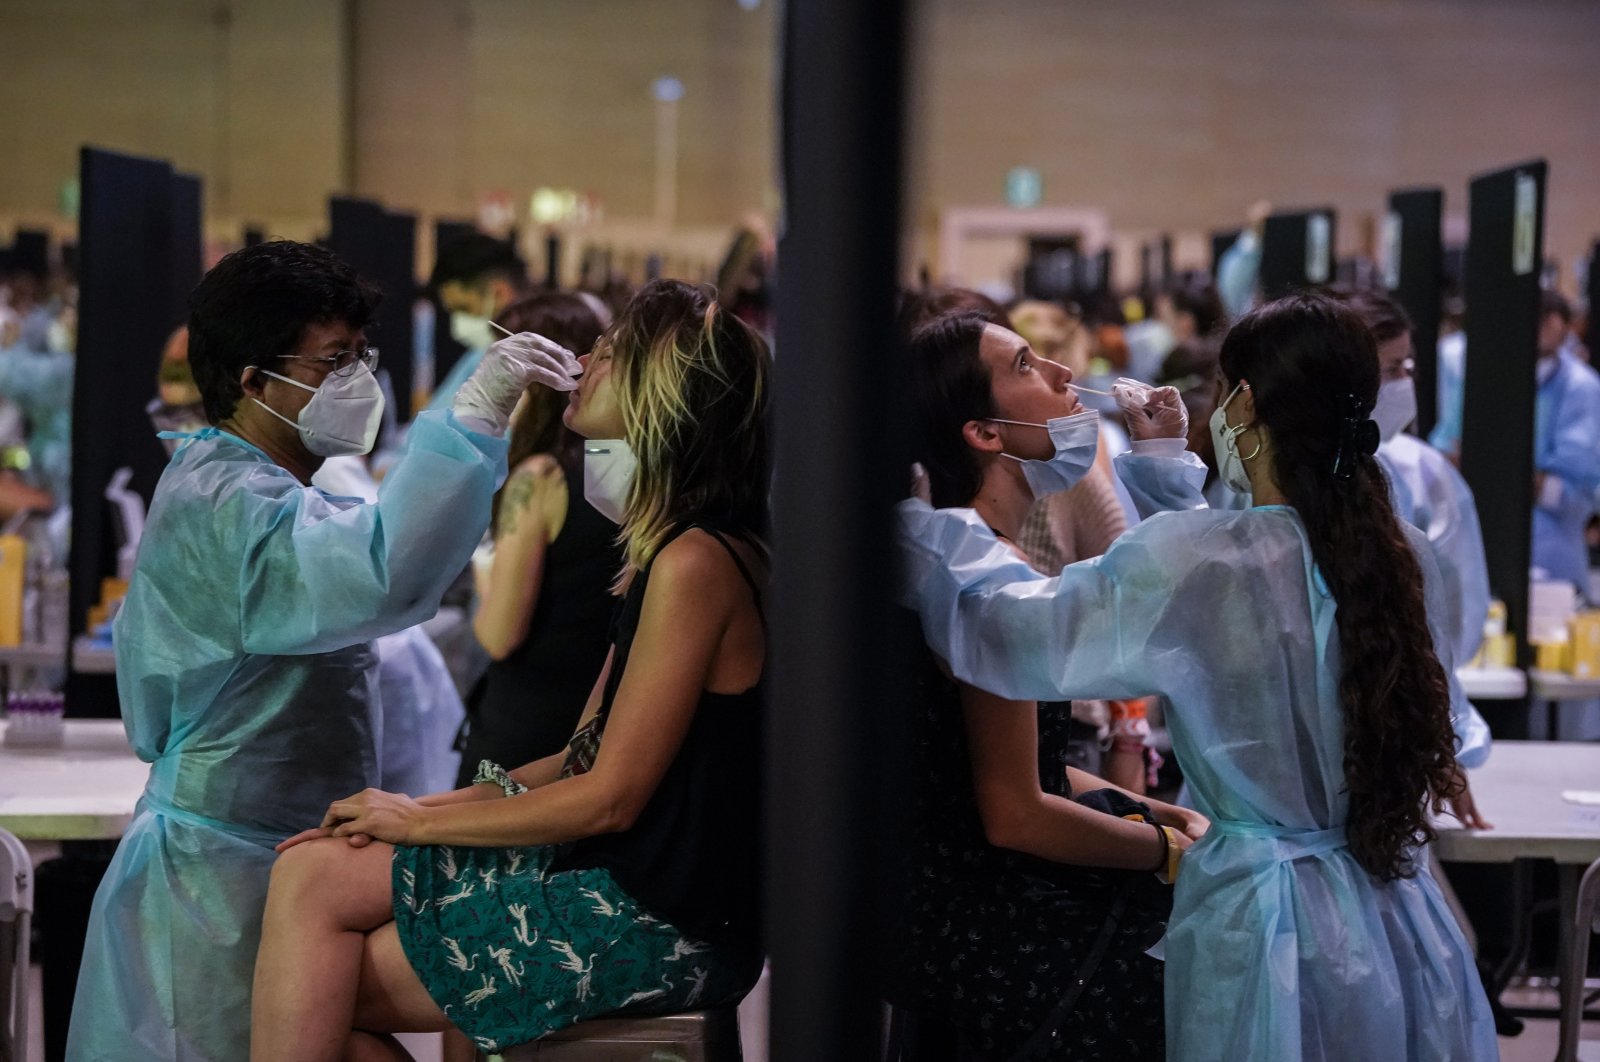 Health workers take swab samples for a COVID-19 antigen test ahead of the Cruilla music festival in Barcelona, Spain, July 9, 2021. (AP Photo)